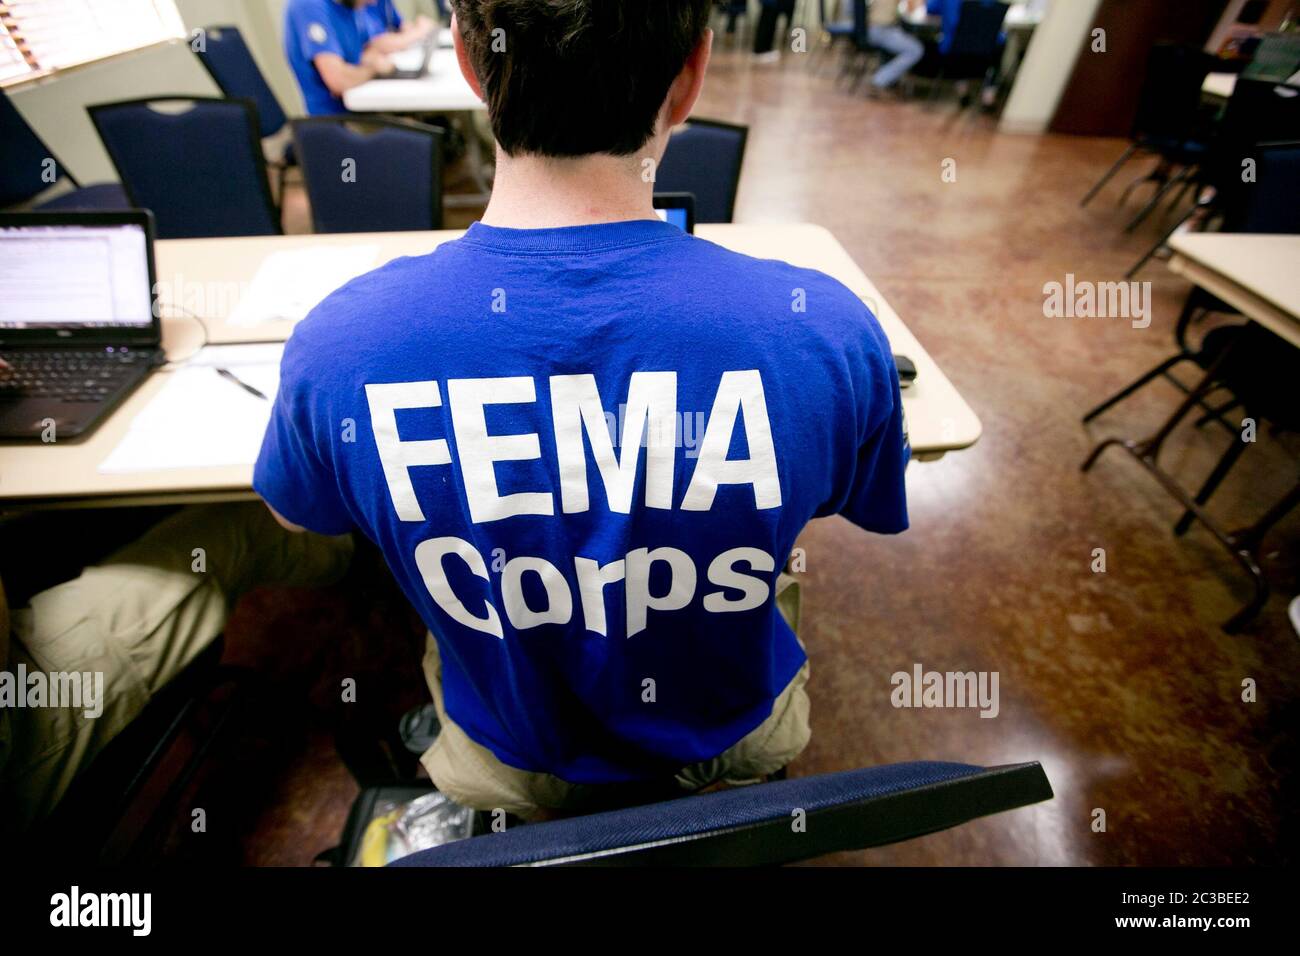 FEMA in Wimberley, Texas - Wimberley, Texas USA June 6th, 2015: The Federal Emergency Management Agency set up a mobile intake center (MRIC) to serve local residents who want to register for federal aid after devastating floods hit the area over the Memorial Day weekend.   ©Marjorie Kamys Cotera/Daemmrich Photography Stock Photo